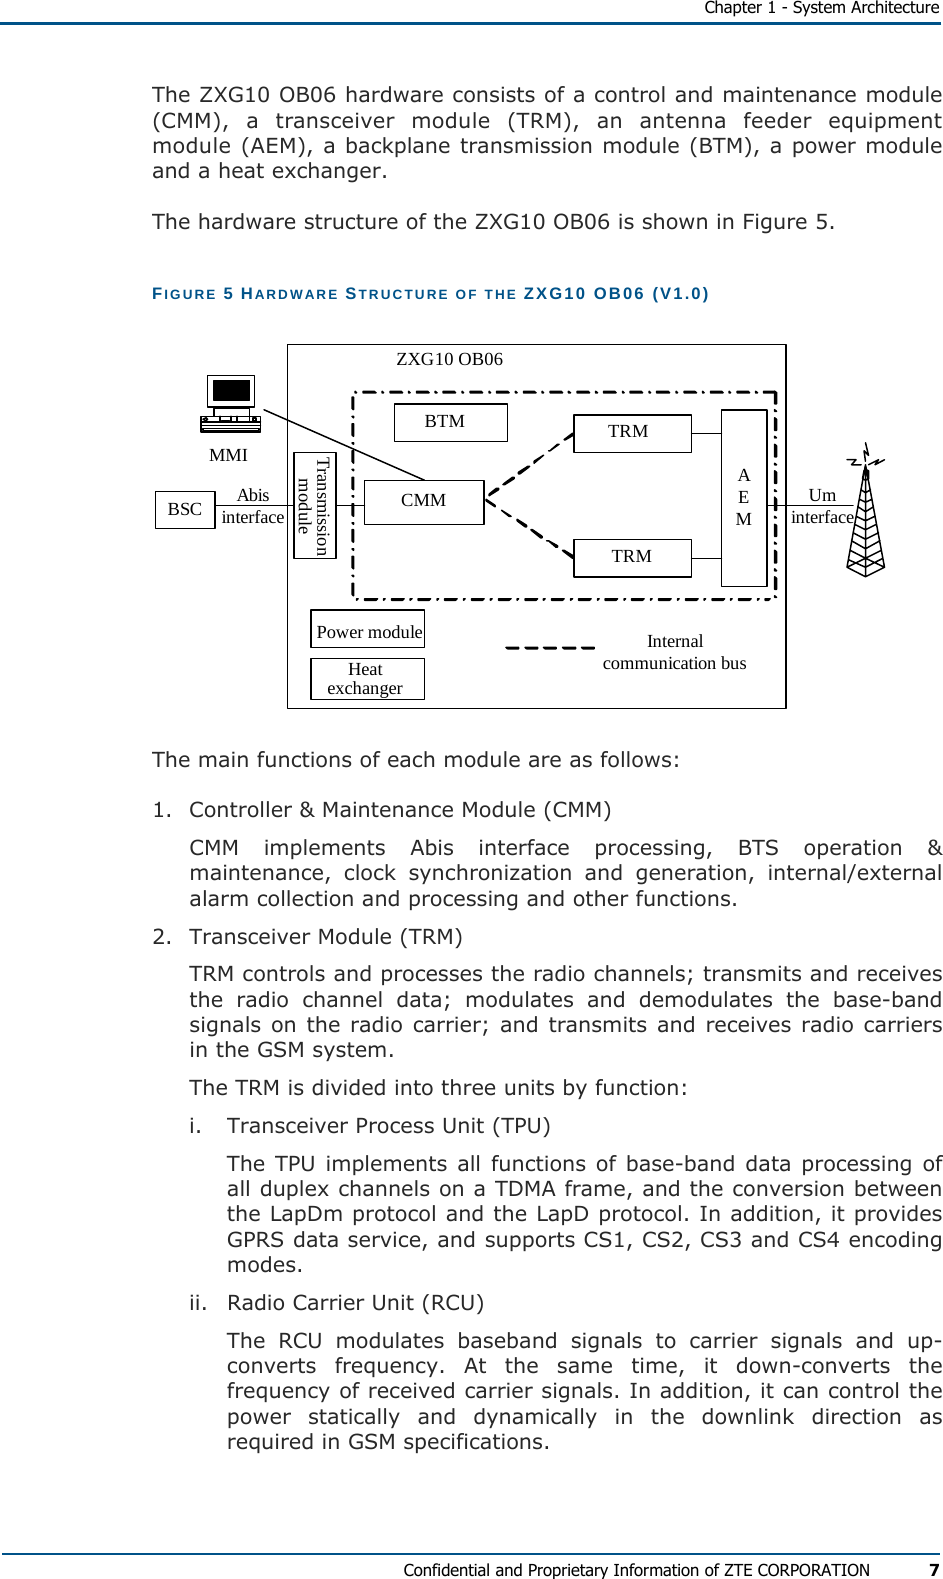   Chapter 1 - System Architecture Confidential and Proprietary Information of ZTE CORPORATION 7 The ZXG10 OB06 hardware consists of a control and maintenance module (CMM), a transceiver module (TRM), an antenna feeder equipment module (AEM), a backplane transmission module (BTM), a power module and a heat exchanger.  The hardware structure of the ZXG10 OB06 is shown in Figure 5. FIGURE 5 HARDWARE STRUCTURE OF THE ZXG10 OB06 (V1.0) CMMPower moduleTRMTRMAEMUminterfaceInternalcommunication busZXG10 OB06BSC AbisinterfaceHeatexchangerTransmissionmoduleMMIBTM The main functions of each module are as follows: 1.  Controller &amp; Maintenance Module (CMM)  CMM implements Abis interface processing, BTS operation &amp; maintenance, clock synchronization and generation, internal/external alarm collection and processing and other functions. 2.  Transceiver Module (TRM)  TRM controls and processes the radio channels; transmits and receives the radio channel data; modulates and demodulates the base-band signals on the radio carrier; and transmits and receives radio carriers in the GSM system. The TRM is divided into three units by function: i.  Transceiver Process Unit (TPU) The TPU implements all functions of base-band data processing of all duplex channels on a TDMA frame, and the conversion between the LapDm protocol and the LapD protocol. In addition, it provides GPRS data service, and supports CS1, CS2, CS3 and CS4 encoding modes. ii.  Radio Carrier Unit (RCU) The RCU modulates baseband signals to carrier signals and up-converts frequency. At the same time, it down-converts the frequency of received carrier signals. In addition, it can control the power statically and dynamically in the downlink direction as required in GSM specifications. 